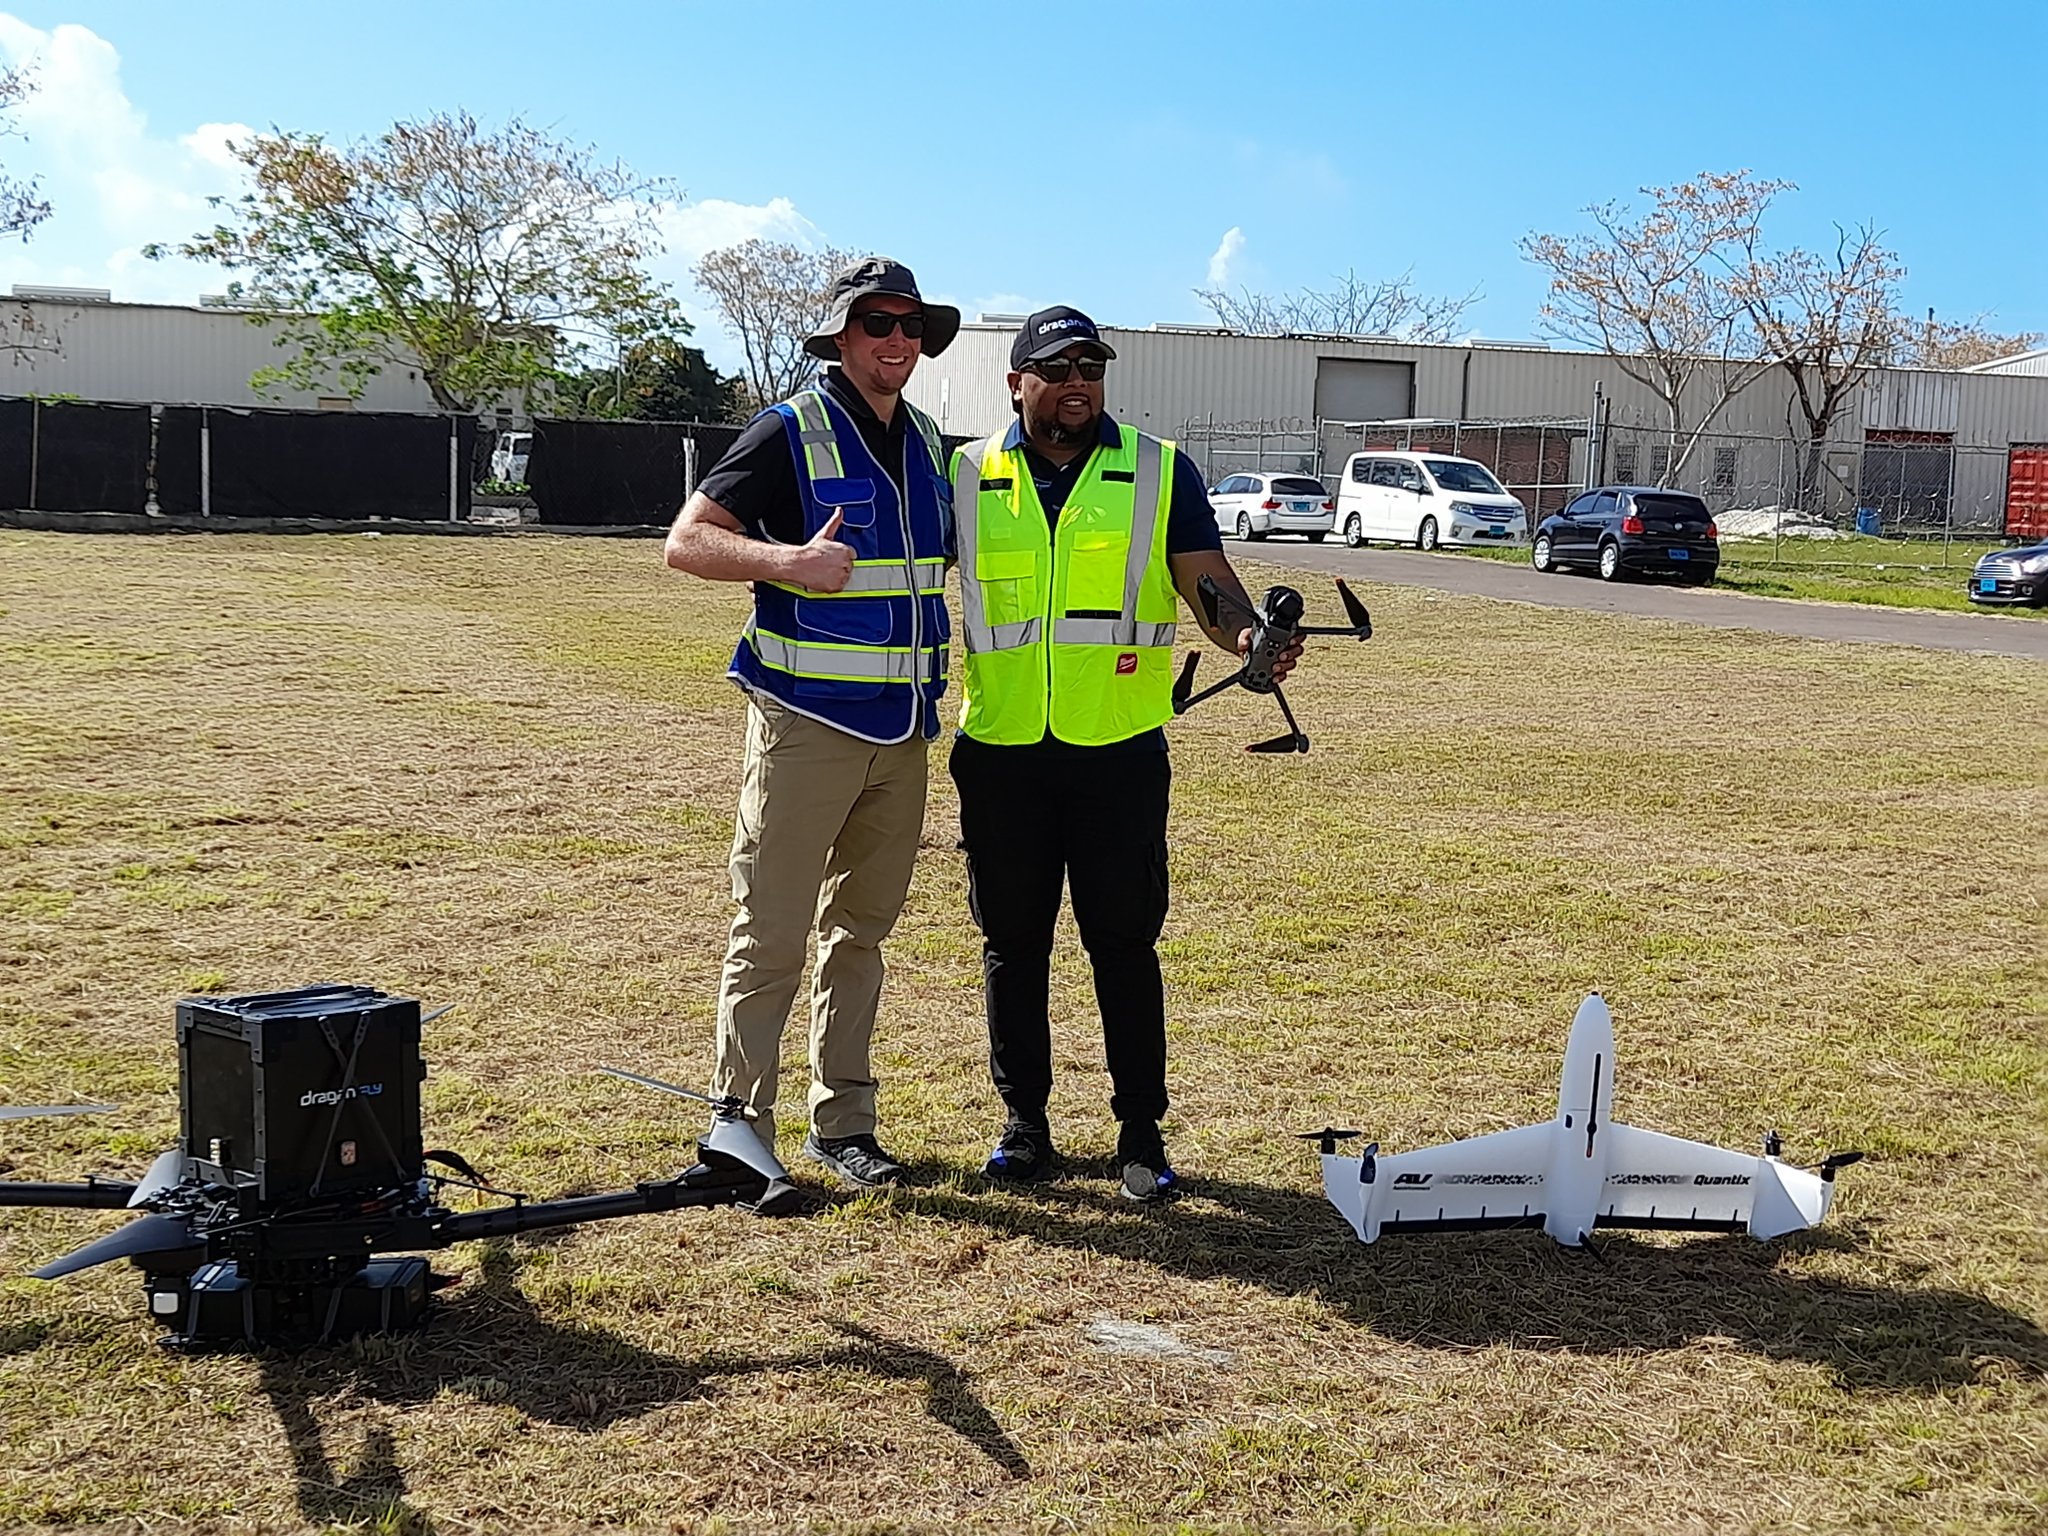 IICA Bahamas on Twitter: "Successful Drone Demo at BAIC with Draganfly and Bella wings. IICA Bahamas great https://t.co/EI38hmMx6q" / Twitter